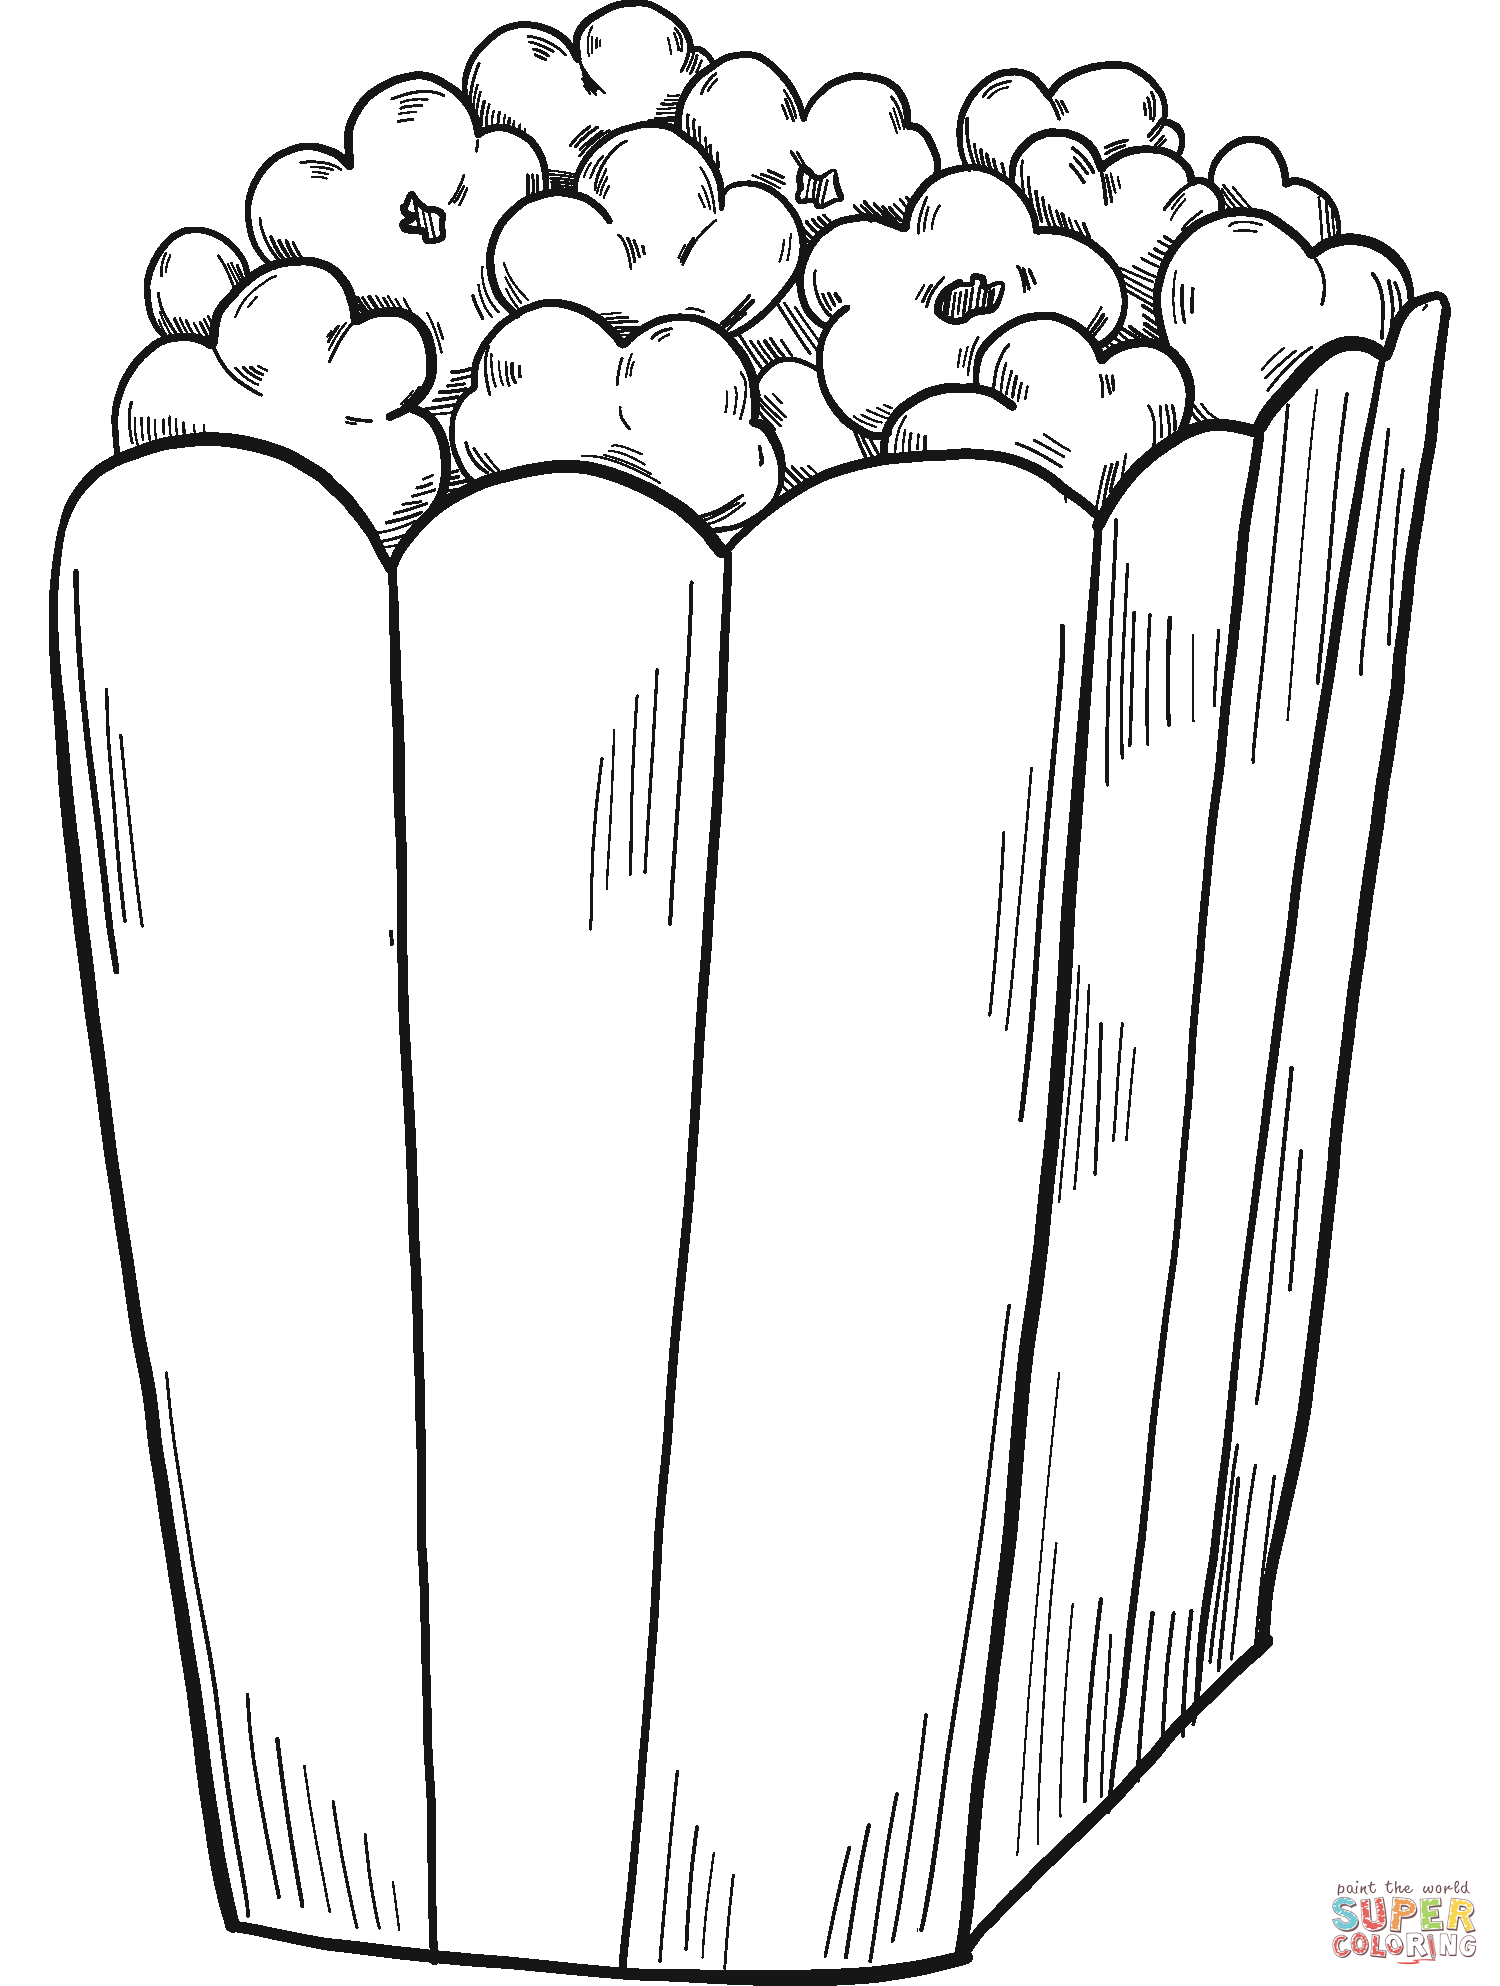 Popcorn coloring page | Free Printable Coloring Pages